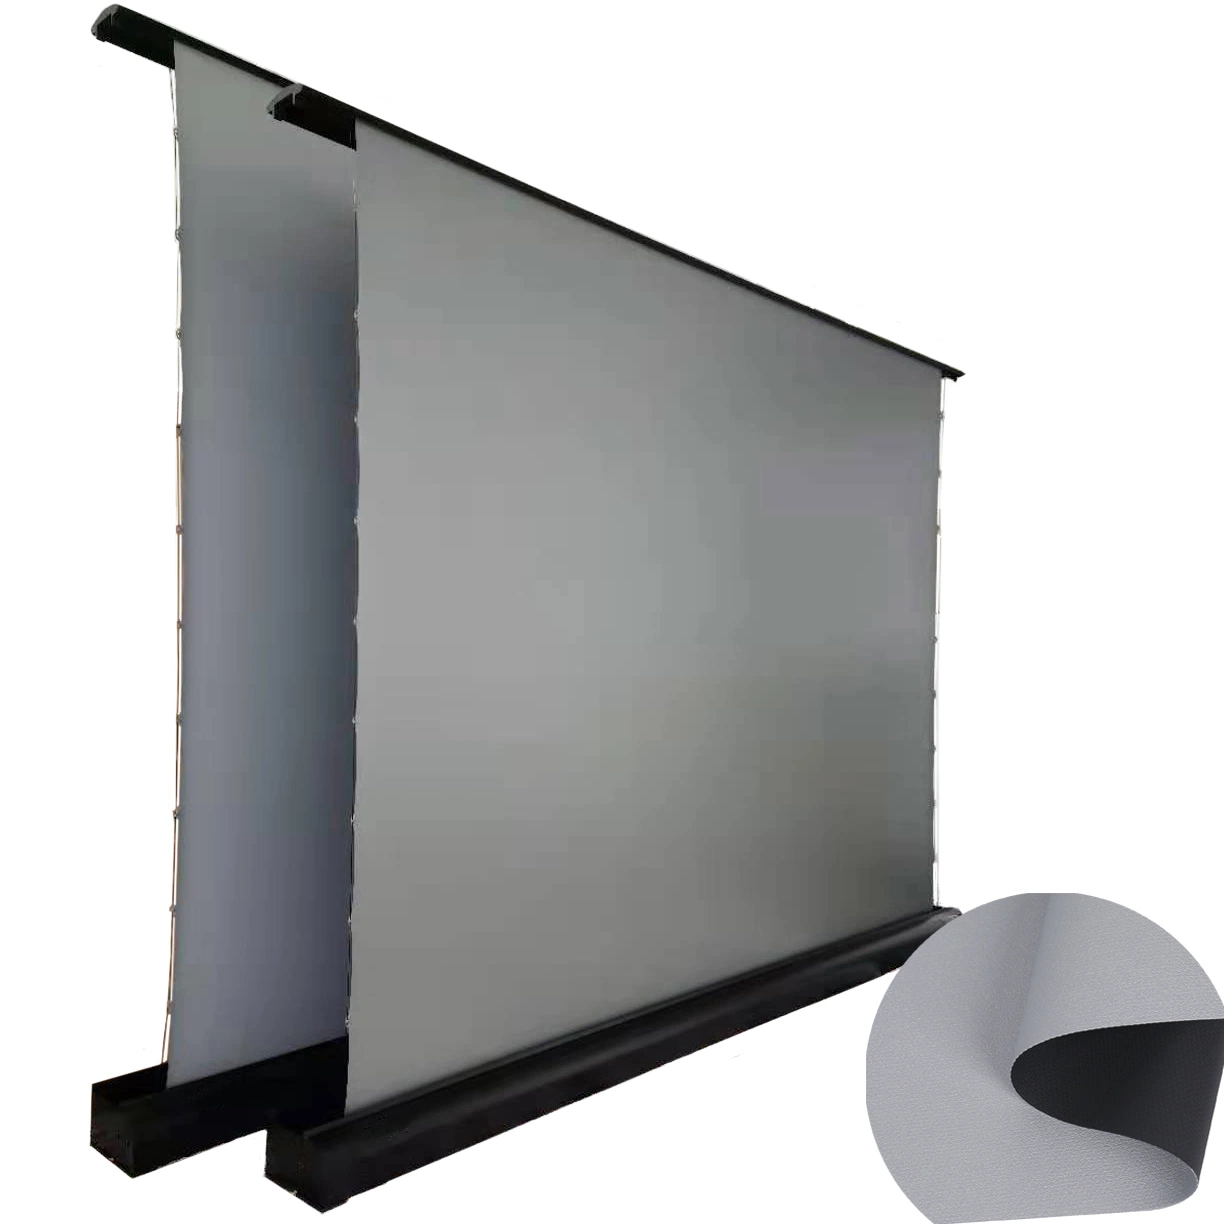 Super Flat Silver Projection Fabric Projection Screen Fabric for Tripod Screen